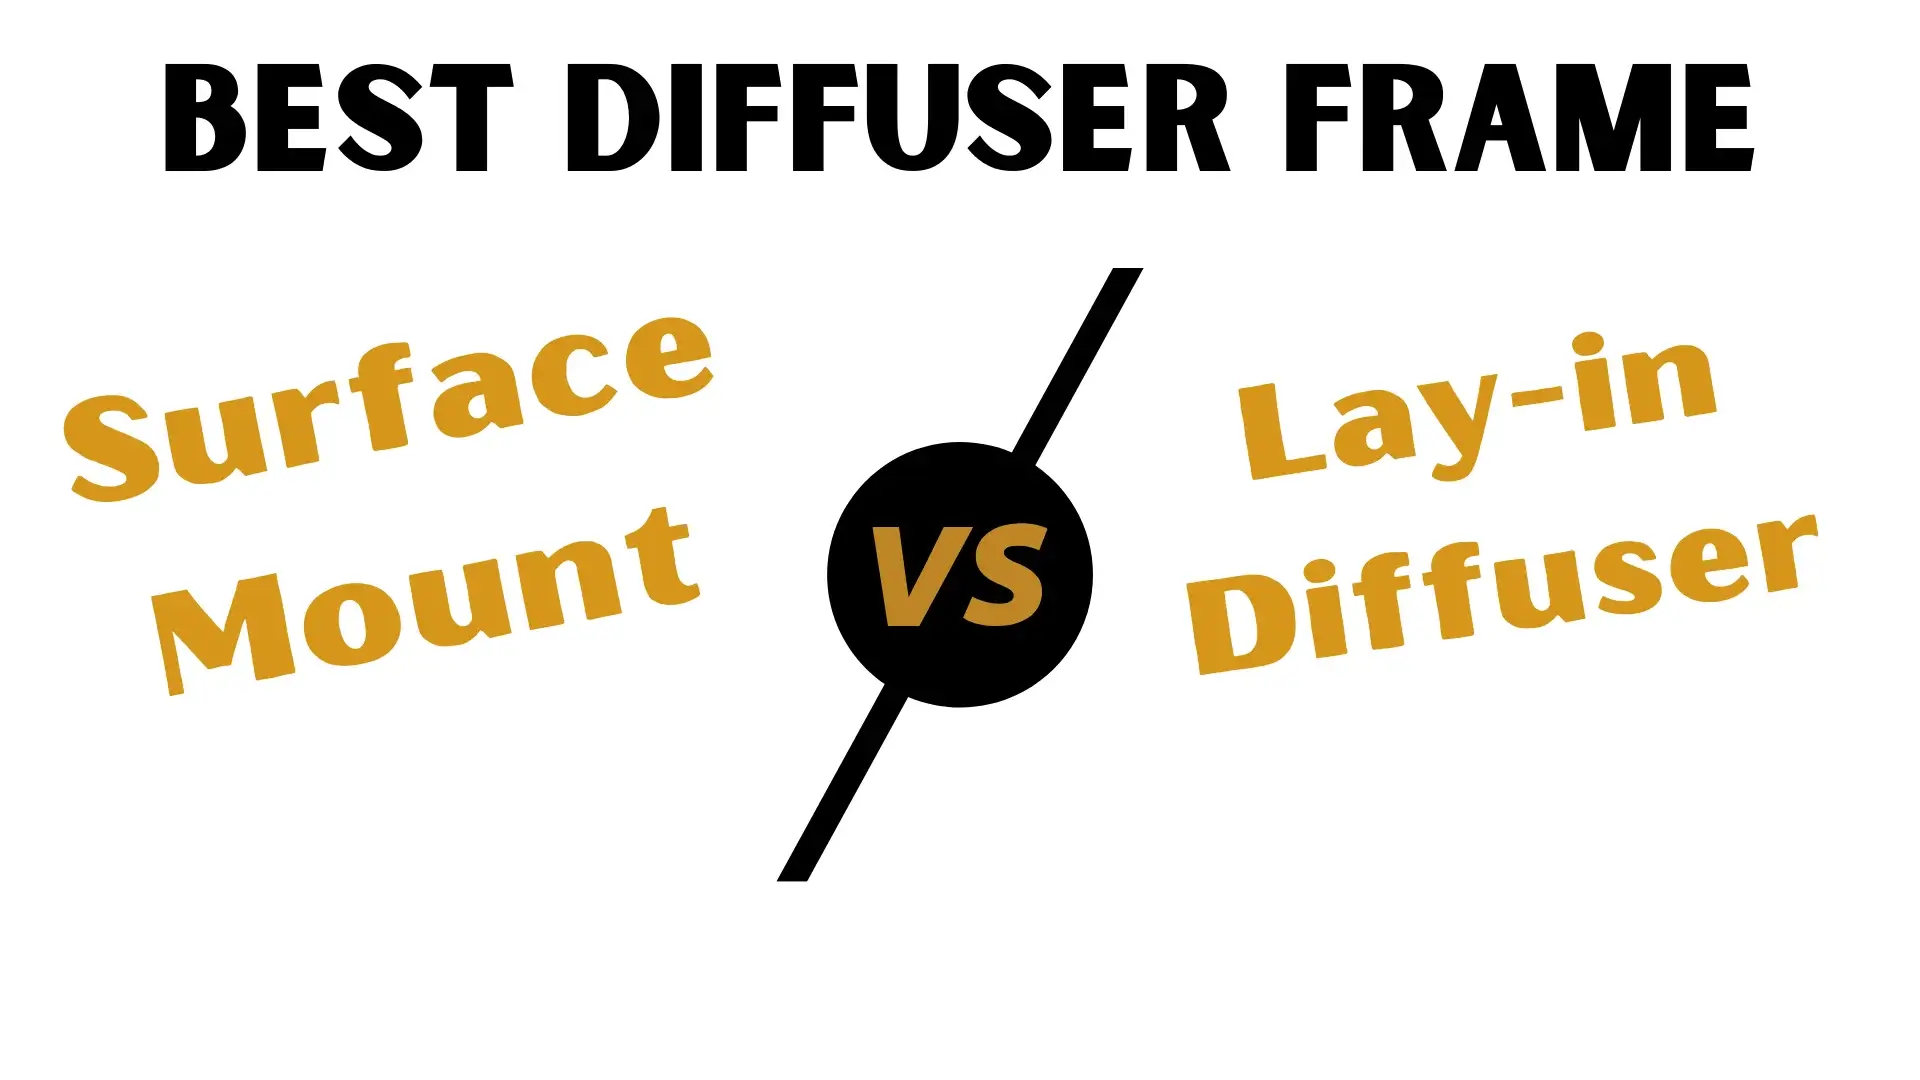 Surface Mount vs Lay-in Diffuser